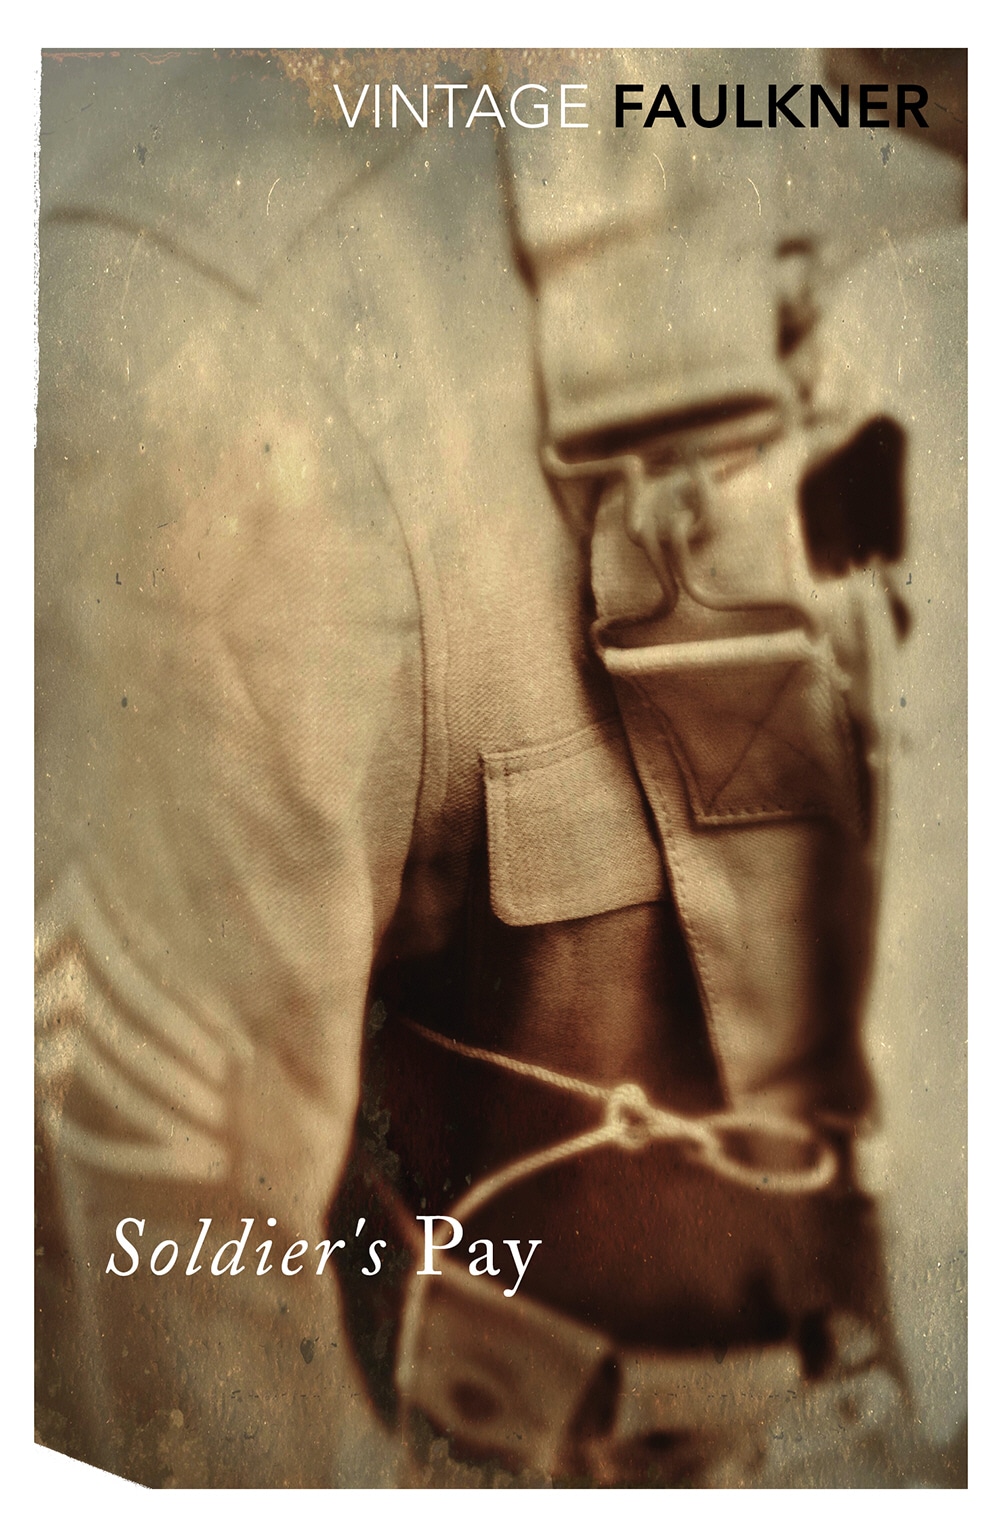 Book “Soldier's Pay” by William Faulkner — October 5, 2000